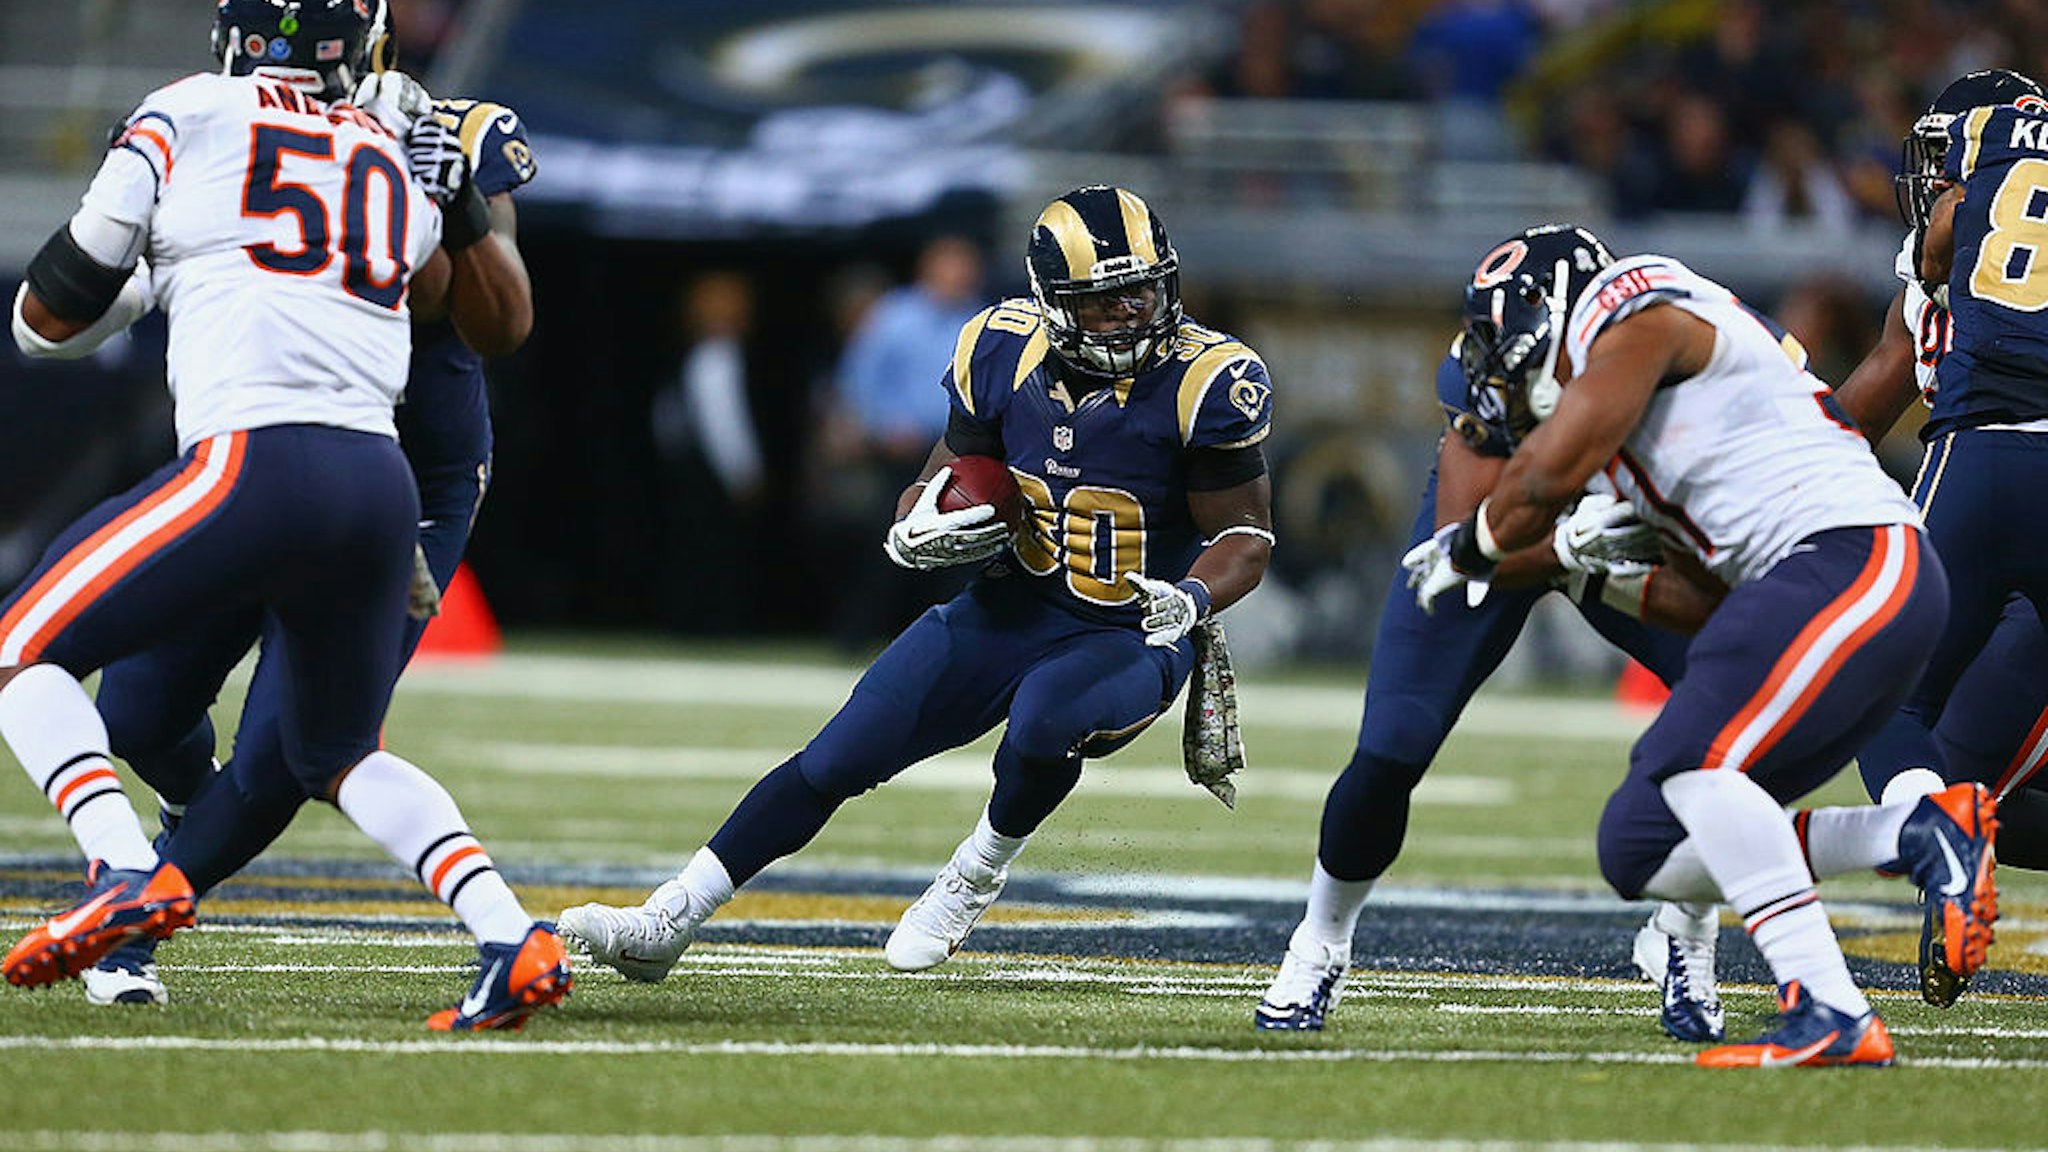 ST. LOUIS, MO - NOVEMBER 24: Zac Stacy #30 of the St. Louis Rams runs against the Chicago Bears at the Edward Jones Dome on November 24, 2013 in St. Louis, Missouri.